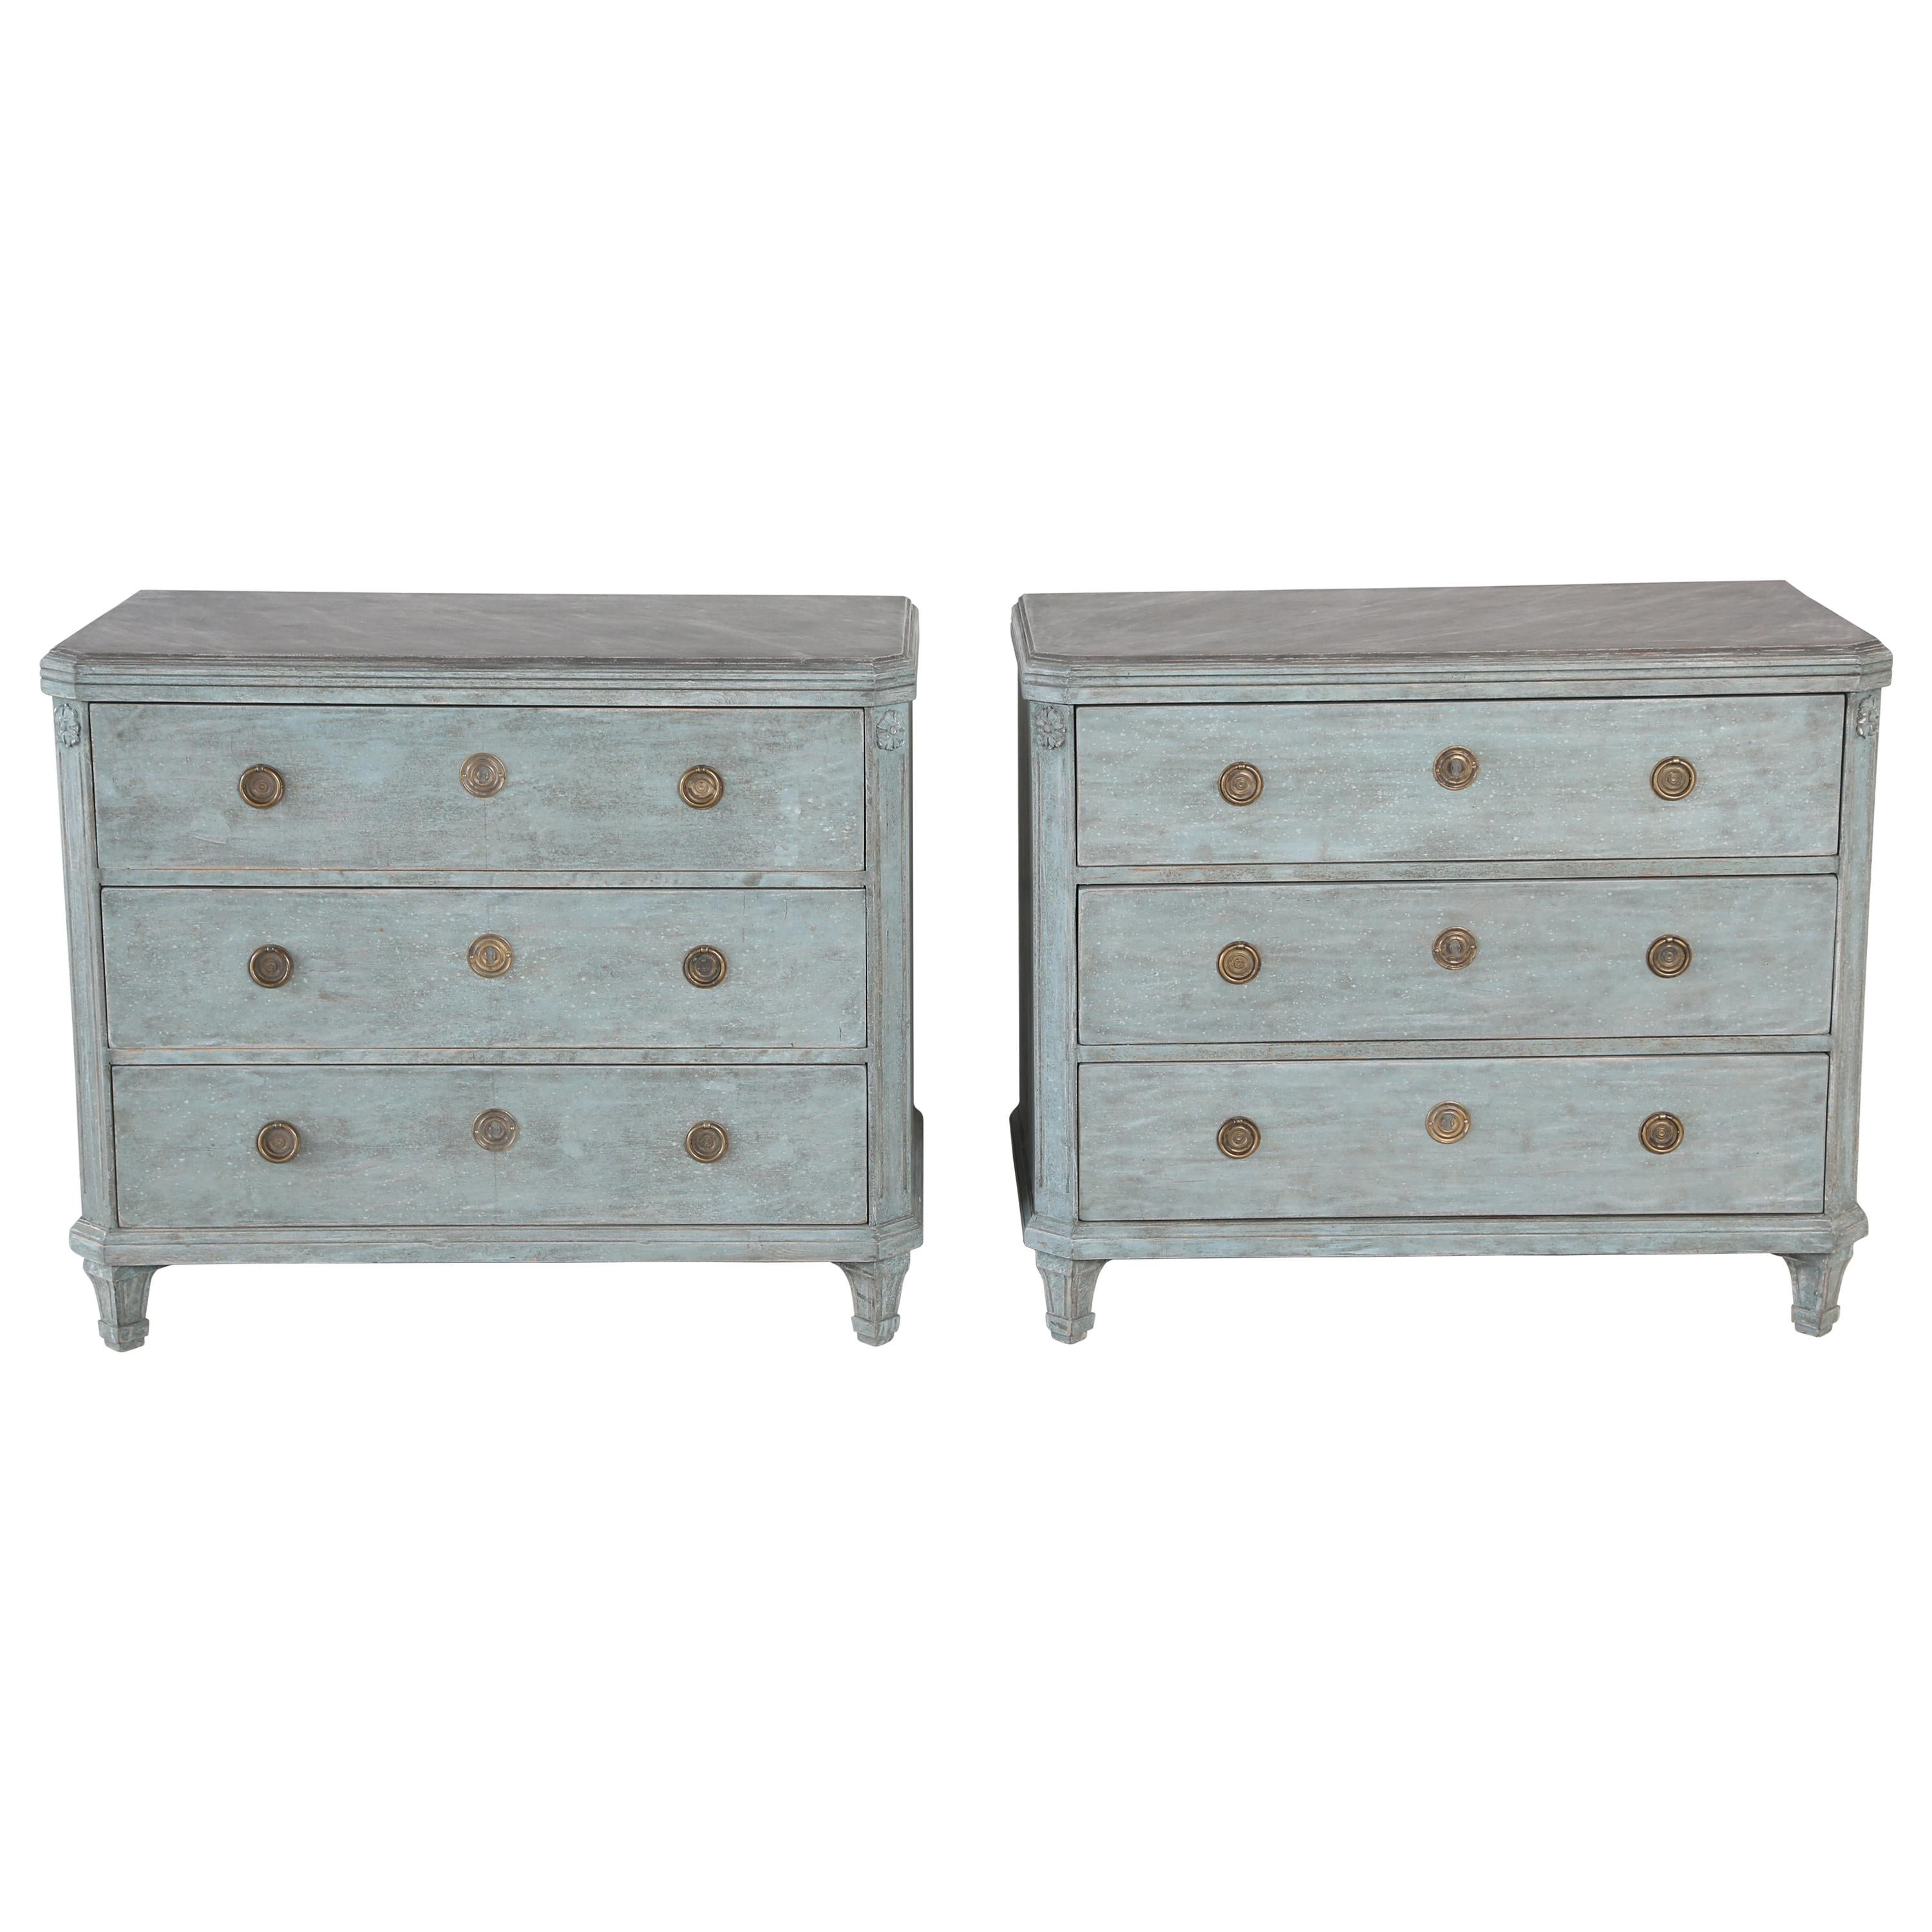 Antique Swedish Gustavian Style Bue Painted Chests, Late 19th Century